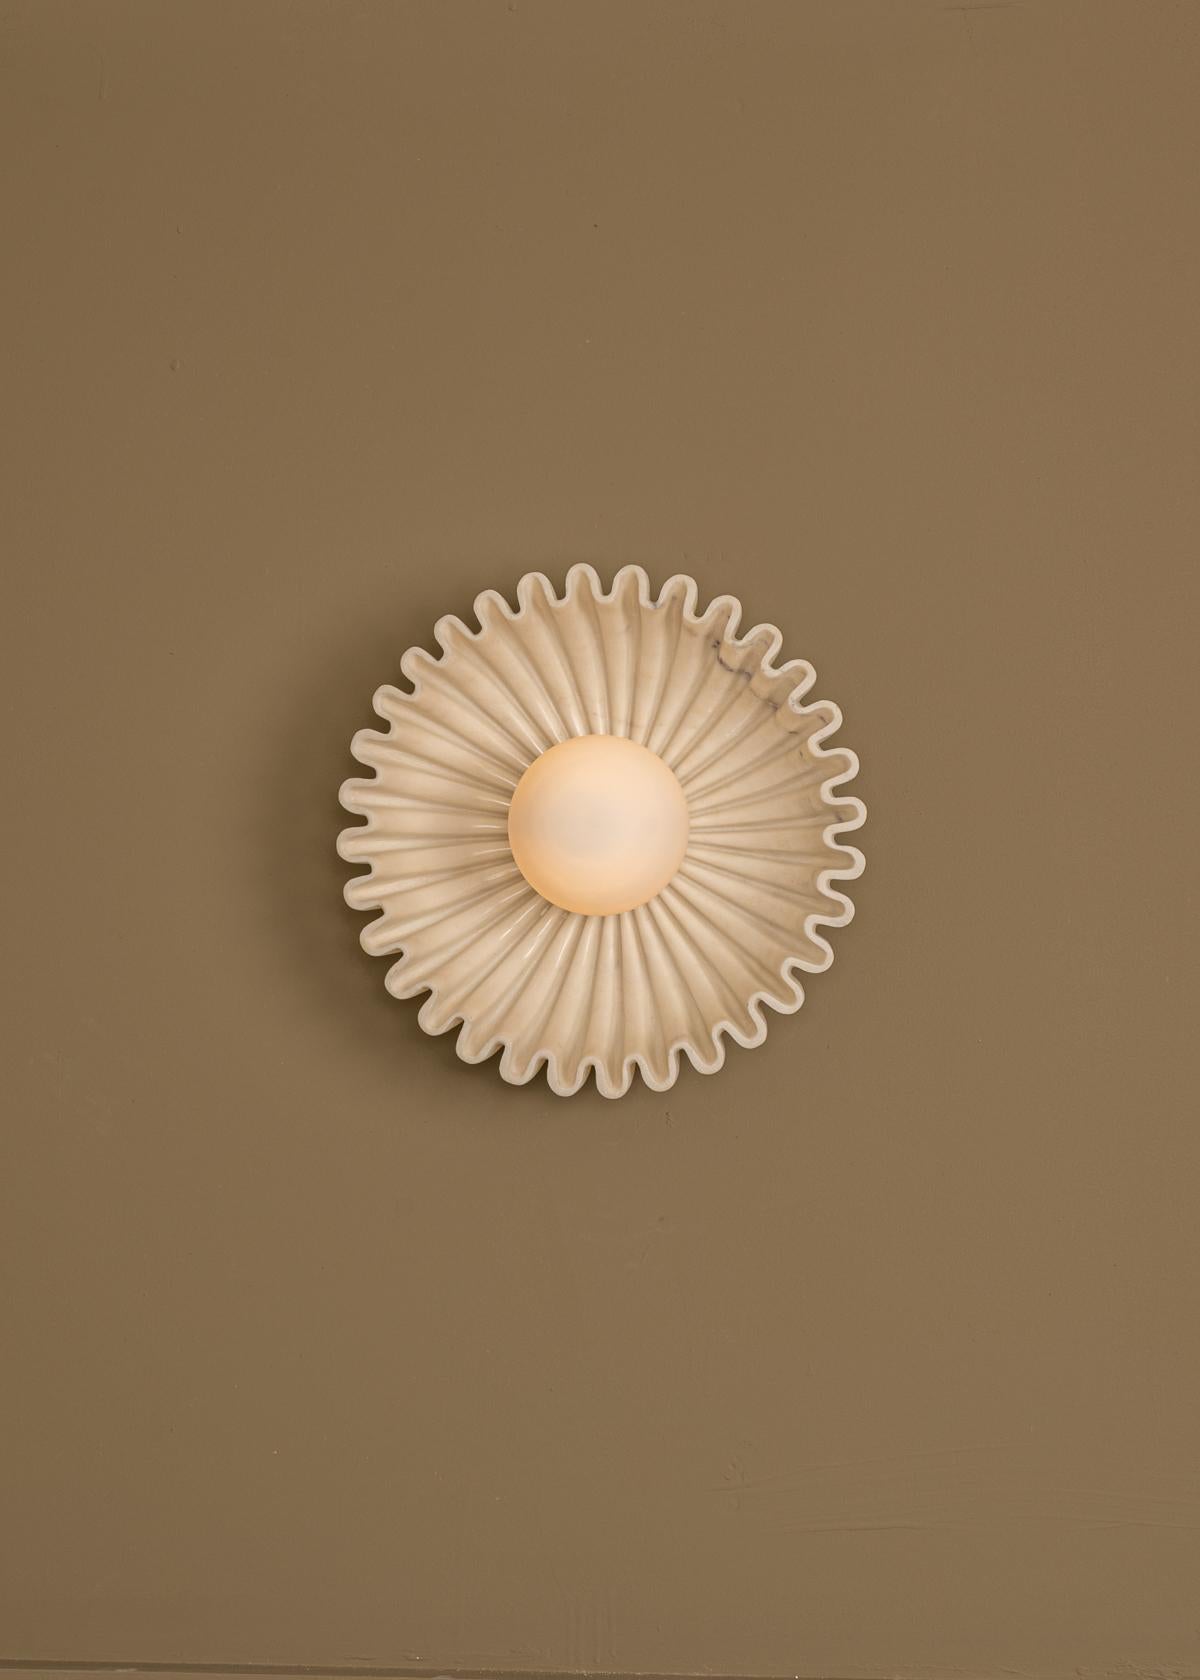 Ostro Ecru Ceramic Wall Sconce by Simone & Marcel
Dimensions: D 17 x W 31 x H 31 cm.
Materials: Marble and glass.

Available in different ceramic and marble options and finishes. Custom options available on request. Please contact us. 

All our